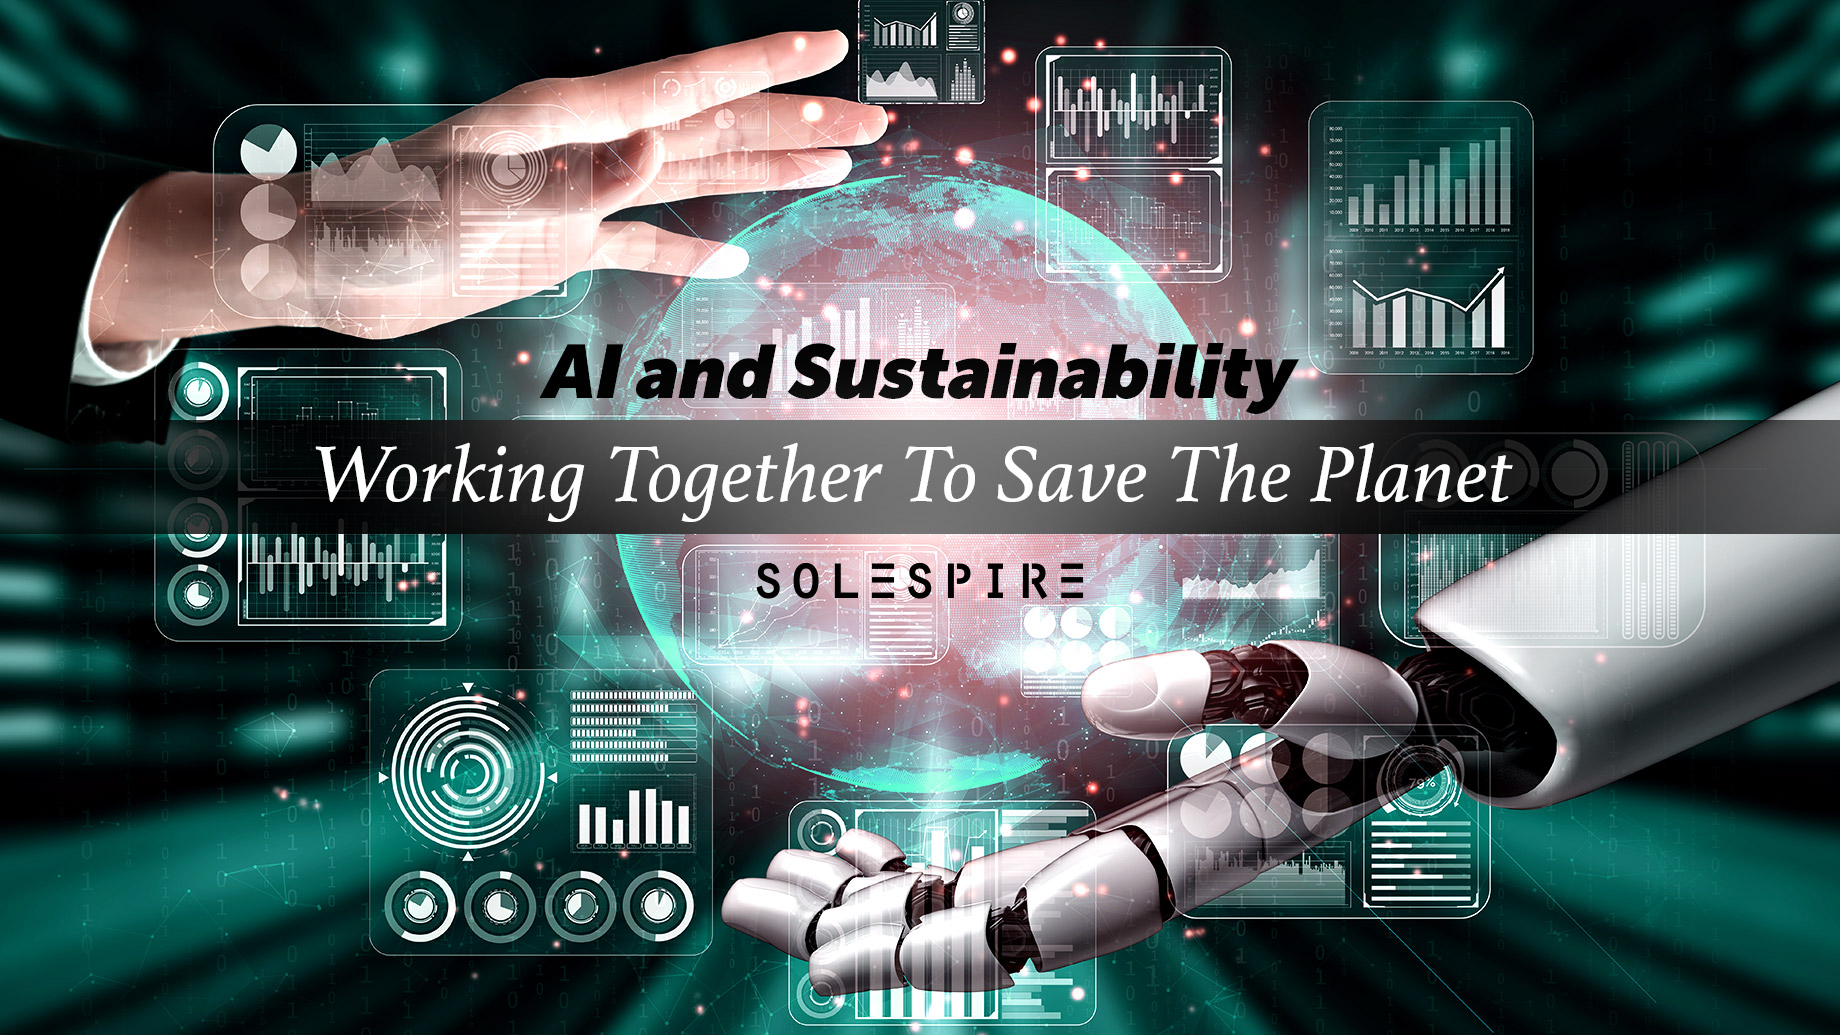 AI and Sustainability - Working Together To Save The Planet